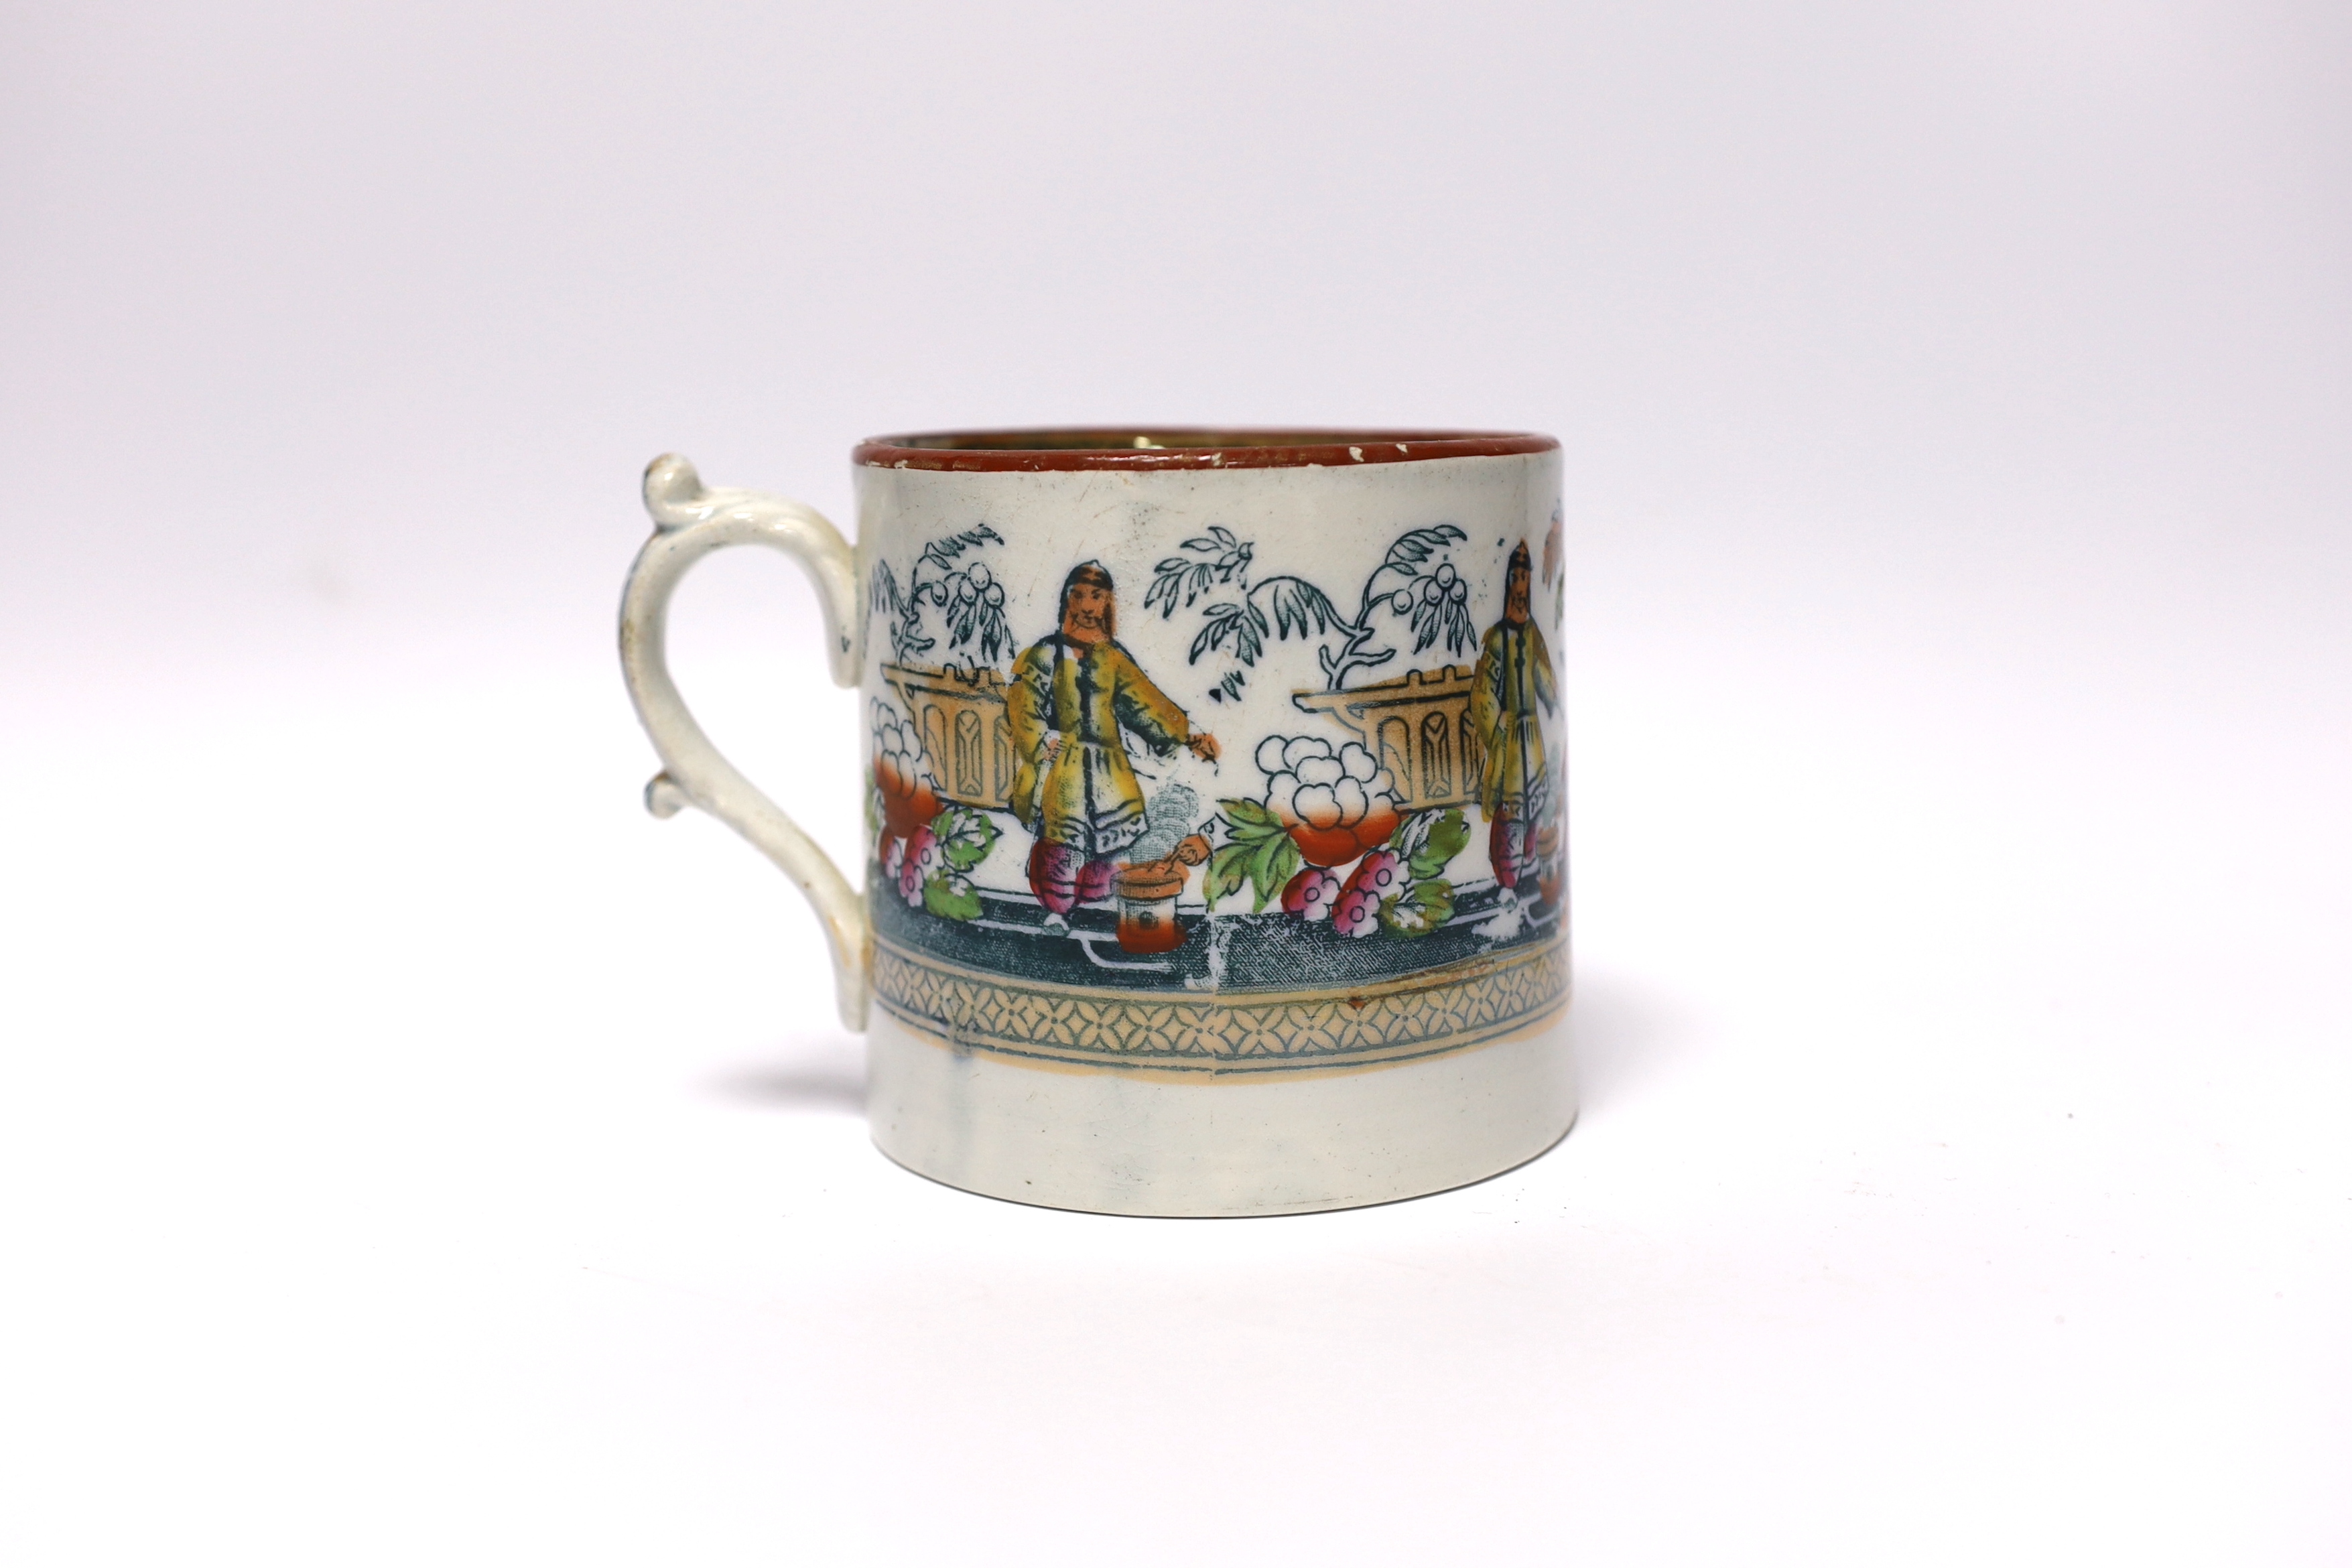 An early 19th century Staffordshire pearlware cylindrical large tankard decorated with Chinese figures and motifs (E and H), 10cm